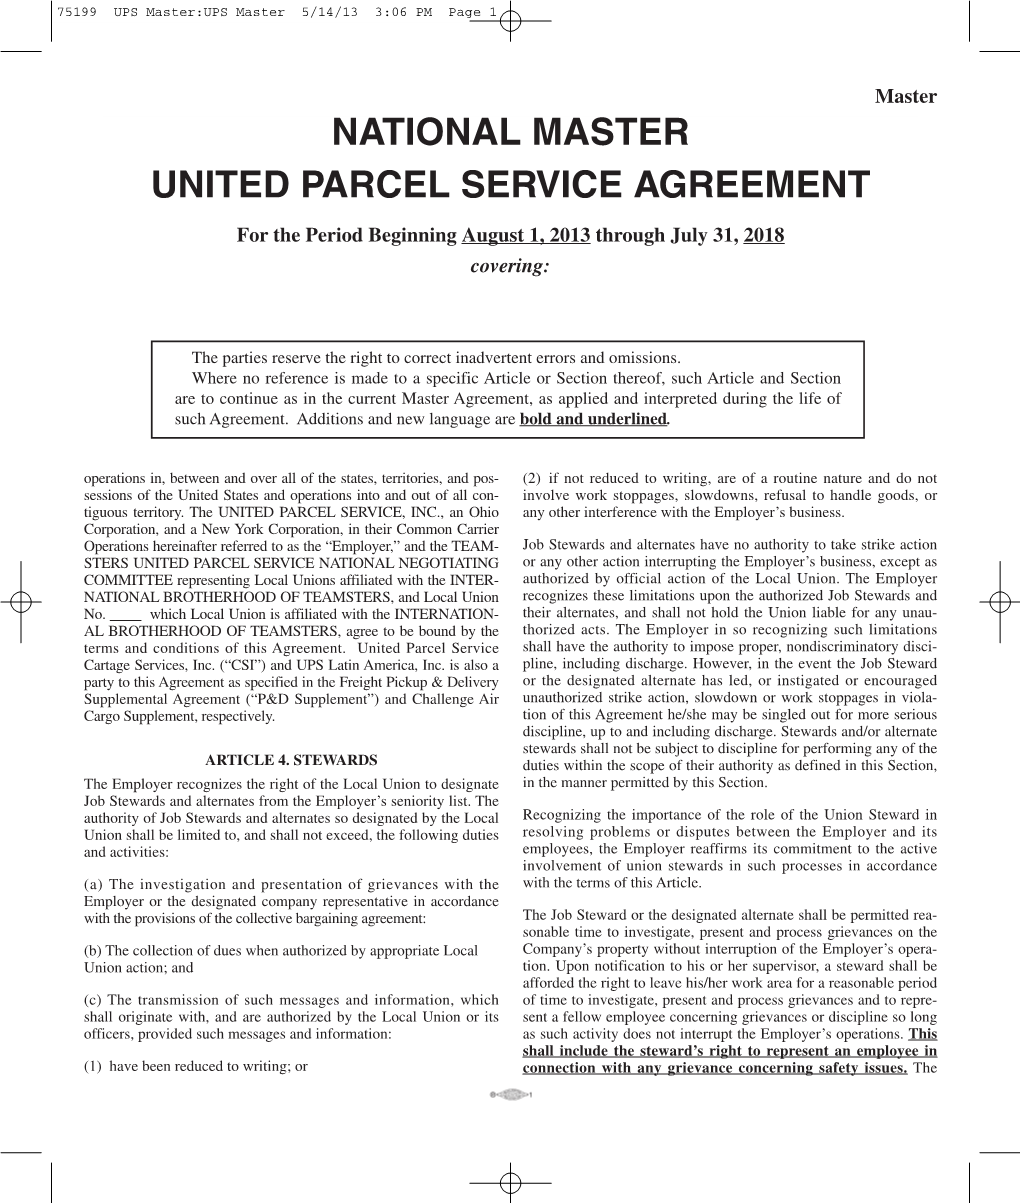 NATIONAL MASTER UNITED PARCEL SERVICE AGREEMENT for the Period Beginning August 1, 2013 Through July 31, 2018 Covering